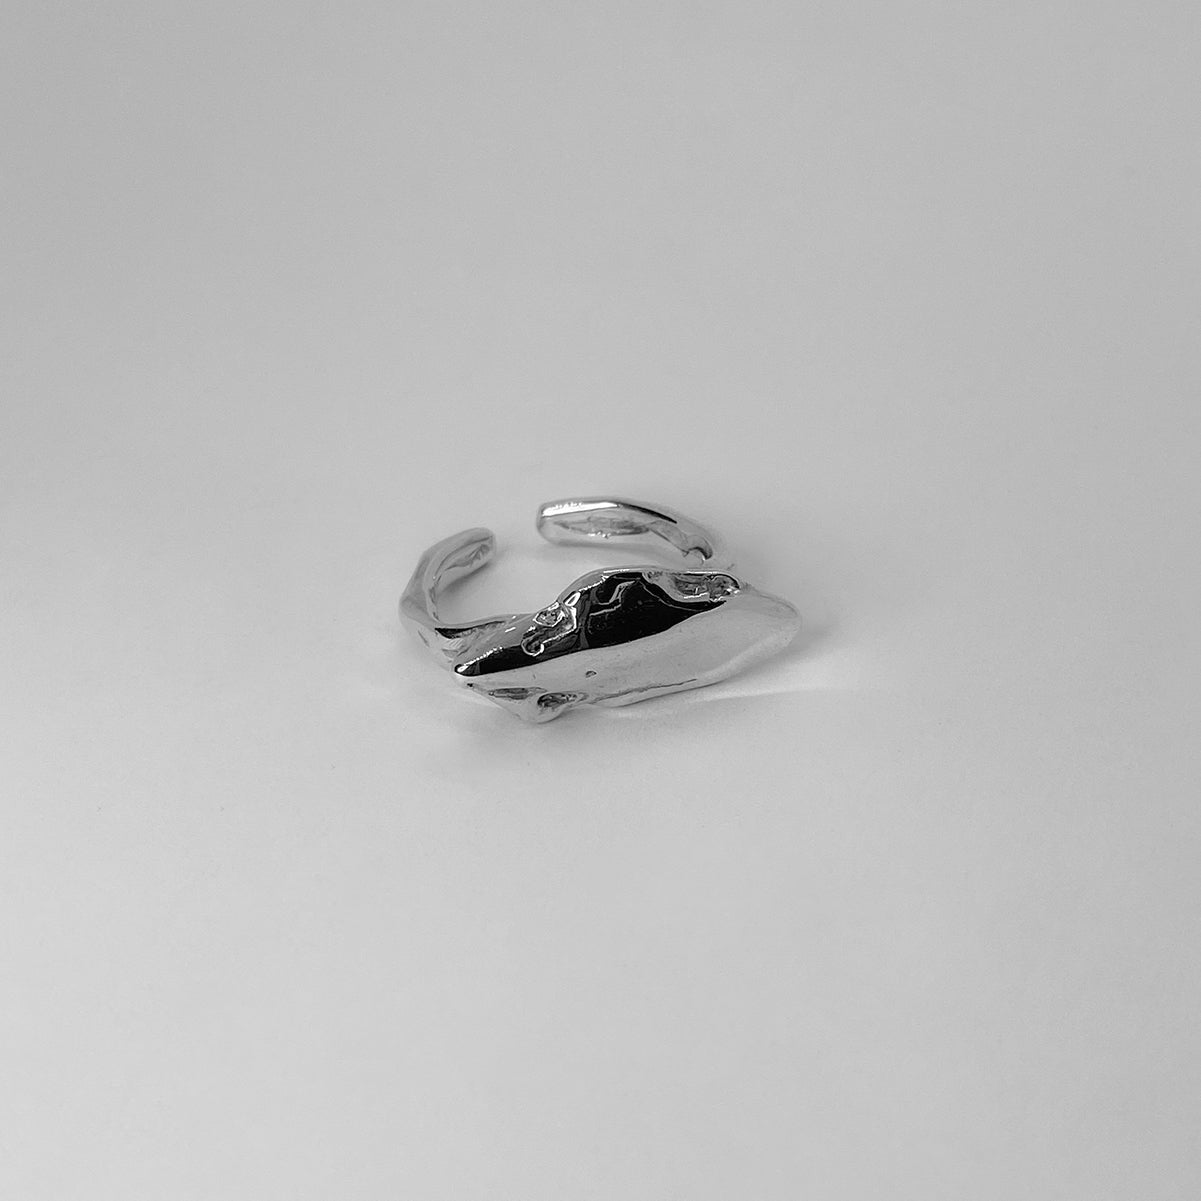 The Nami ring is a handmade piece made of 925 sterling silver. Its surface is raw and glossy